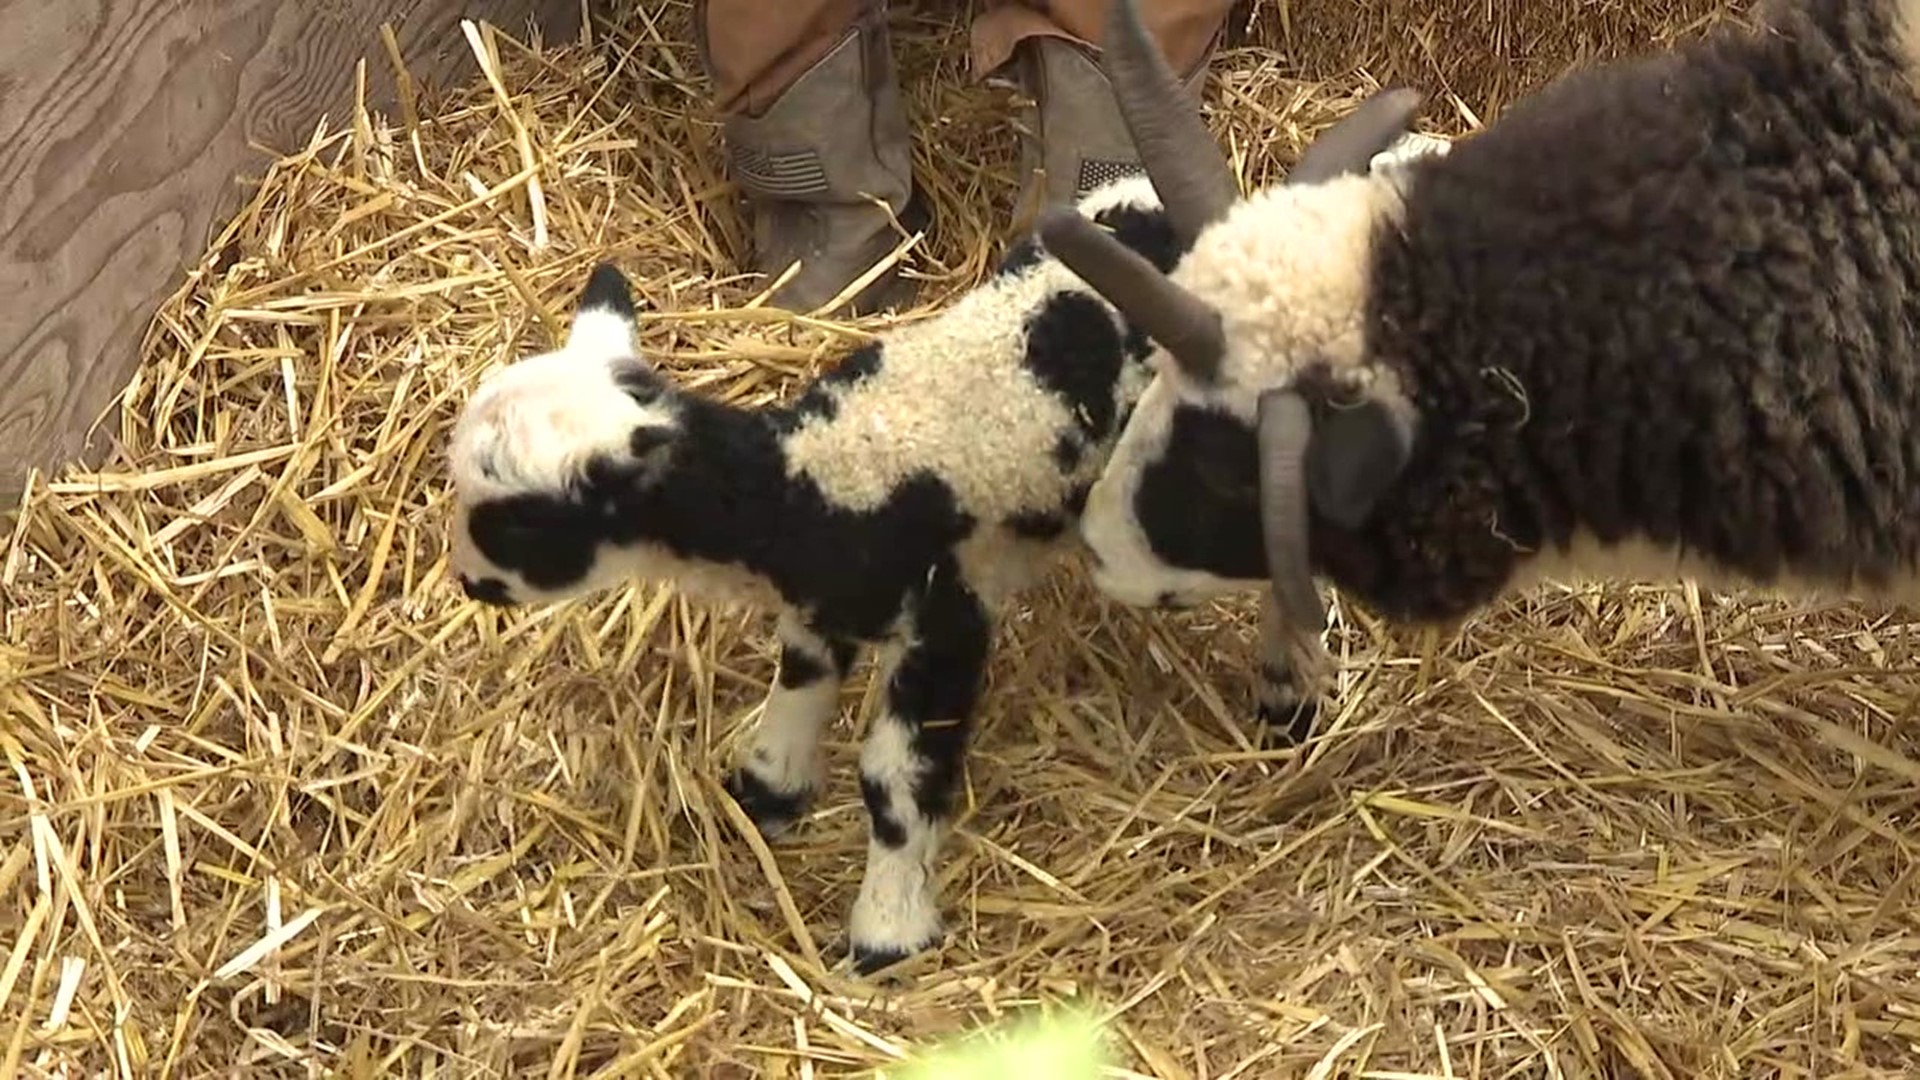 The most famous sheep at this year's fair gave birth on Thursday.